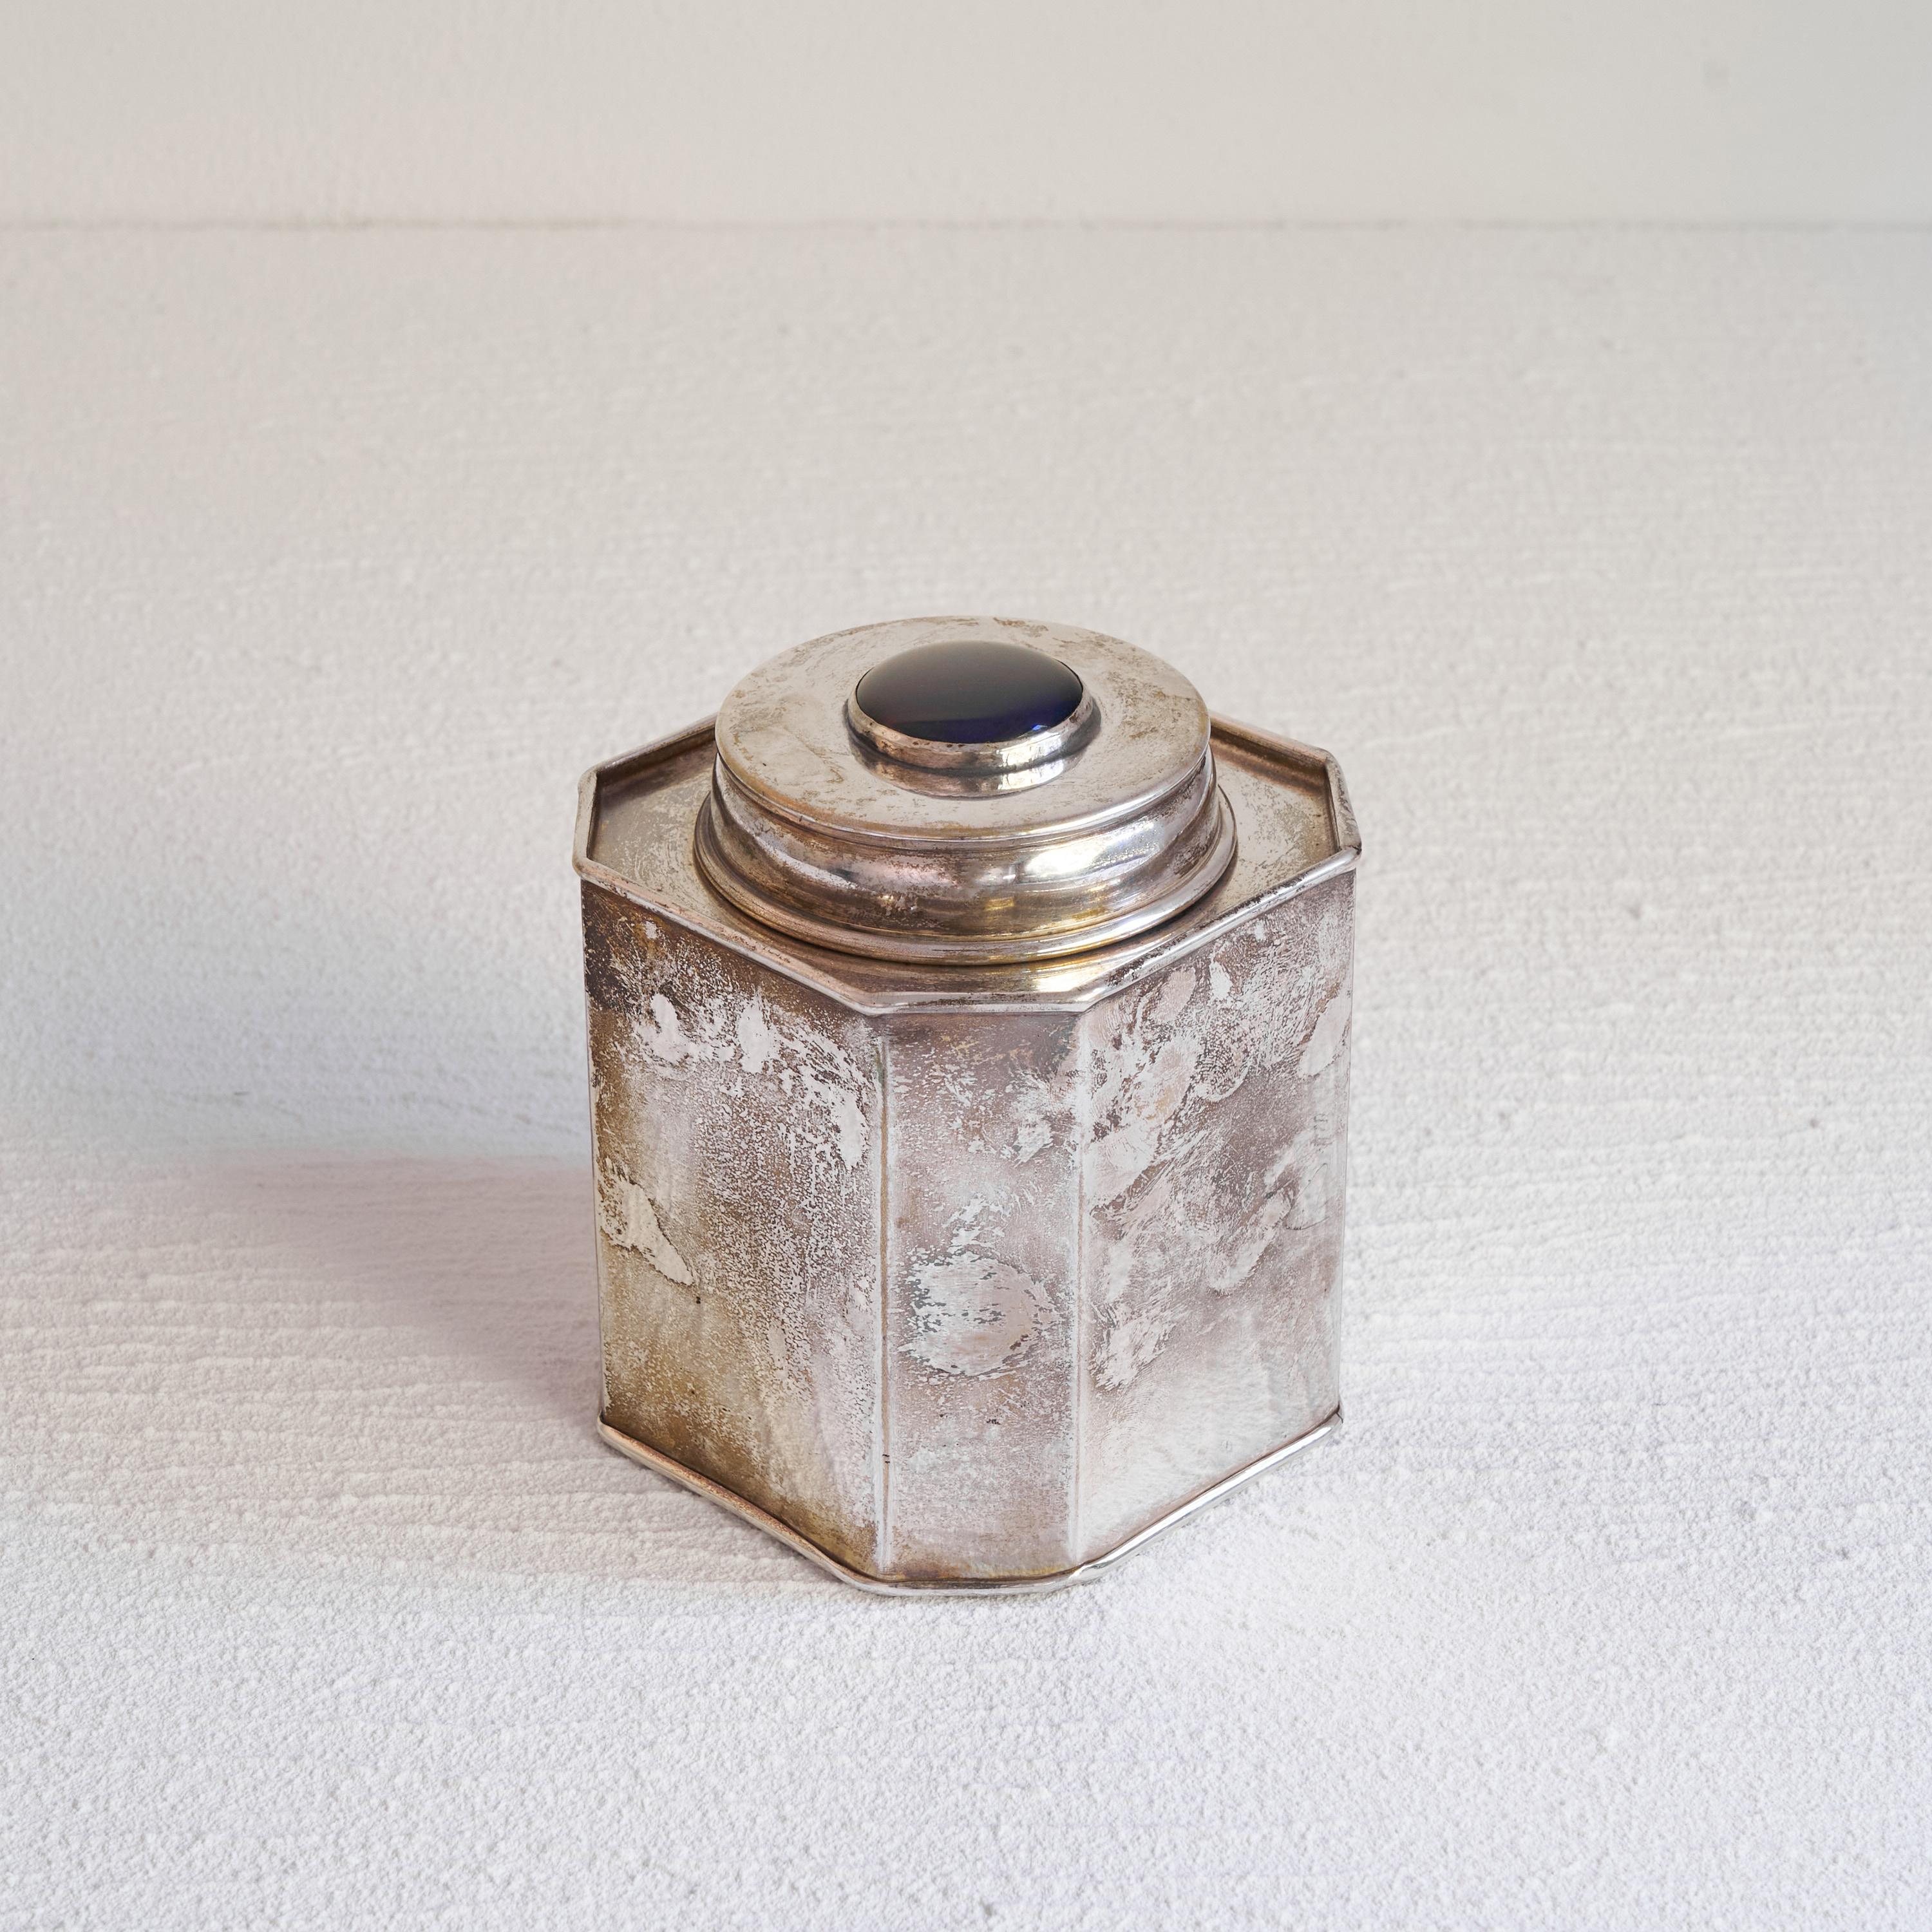 Antique silver plated tea caddy with Lapis Lazuli colored detail. First half of the 20th century. 

Beautiful and wonderfully patinated tea caddy with a striking Lapis Lazuli colored detail in the top. Refined and interesting shaped tea caddy with